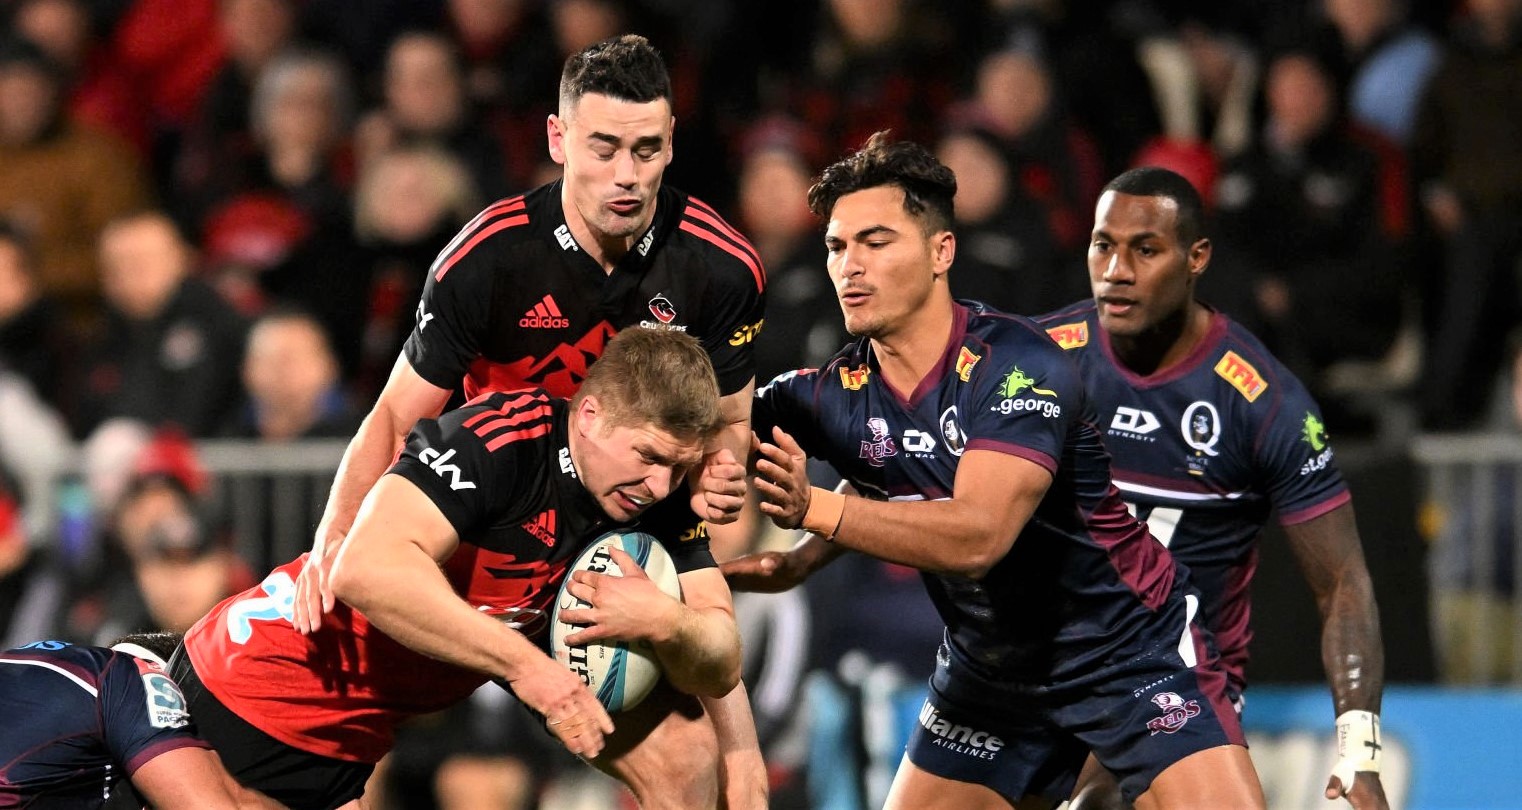 CHRISTCHURCH, NEW ZEALAND - JUNE 03: Jack Goodhue of the Crusaders gets tackled by the defence during the Super Rugby Pacific Quarter Final match between the Crusaders and the Queensland Reds at Orangetheory Stadium on June 03, 2022 in Christchurch, New Zealand. (Photo by Joe Allison/Getty Images)